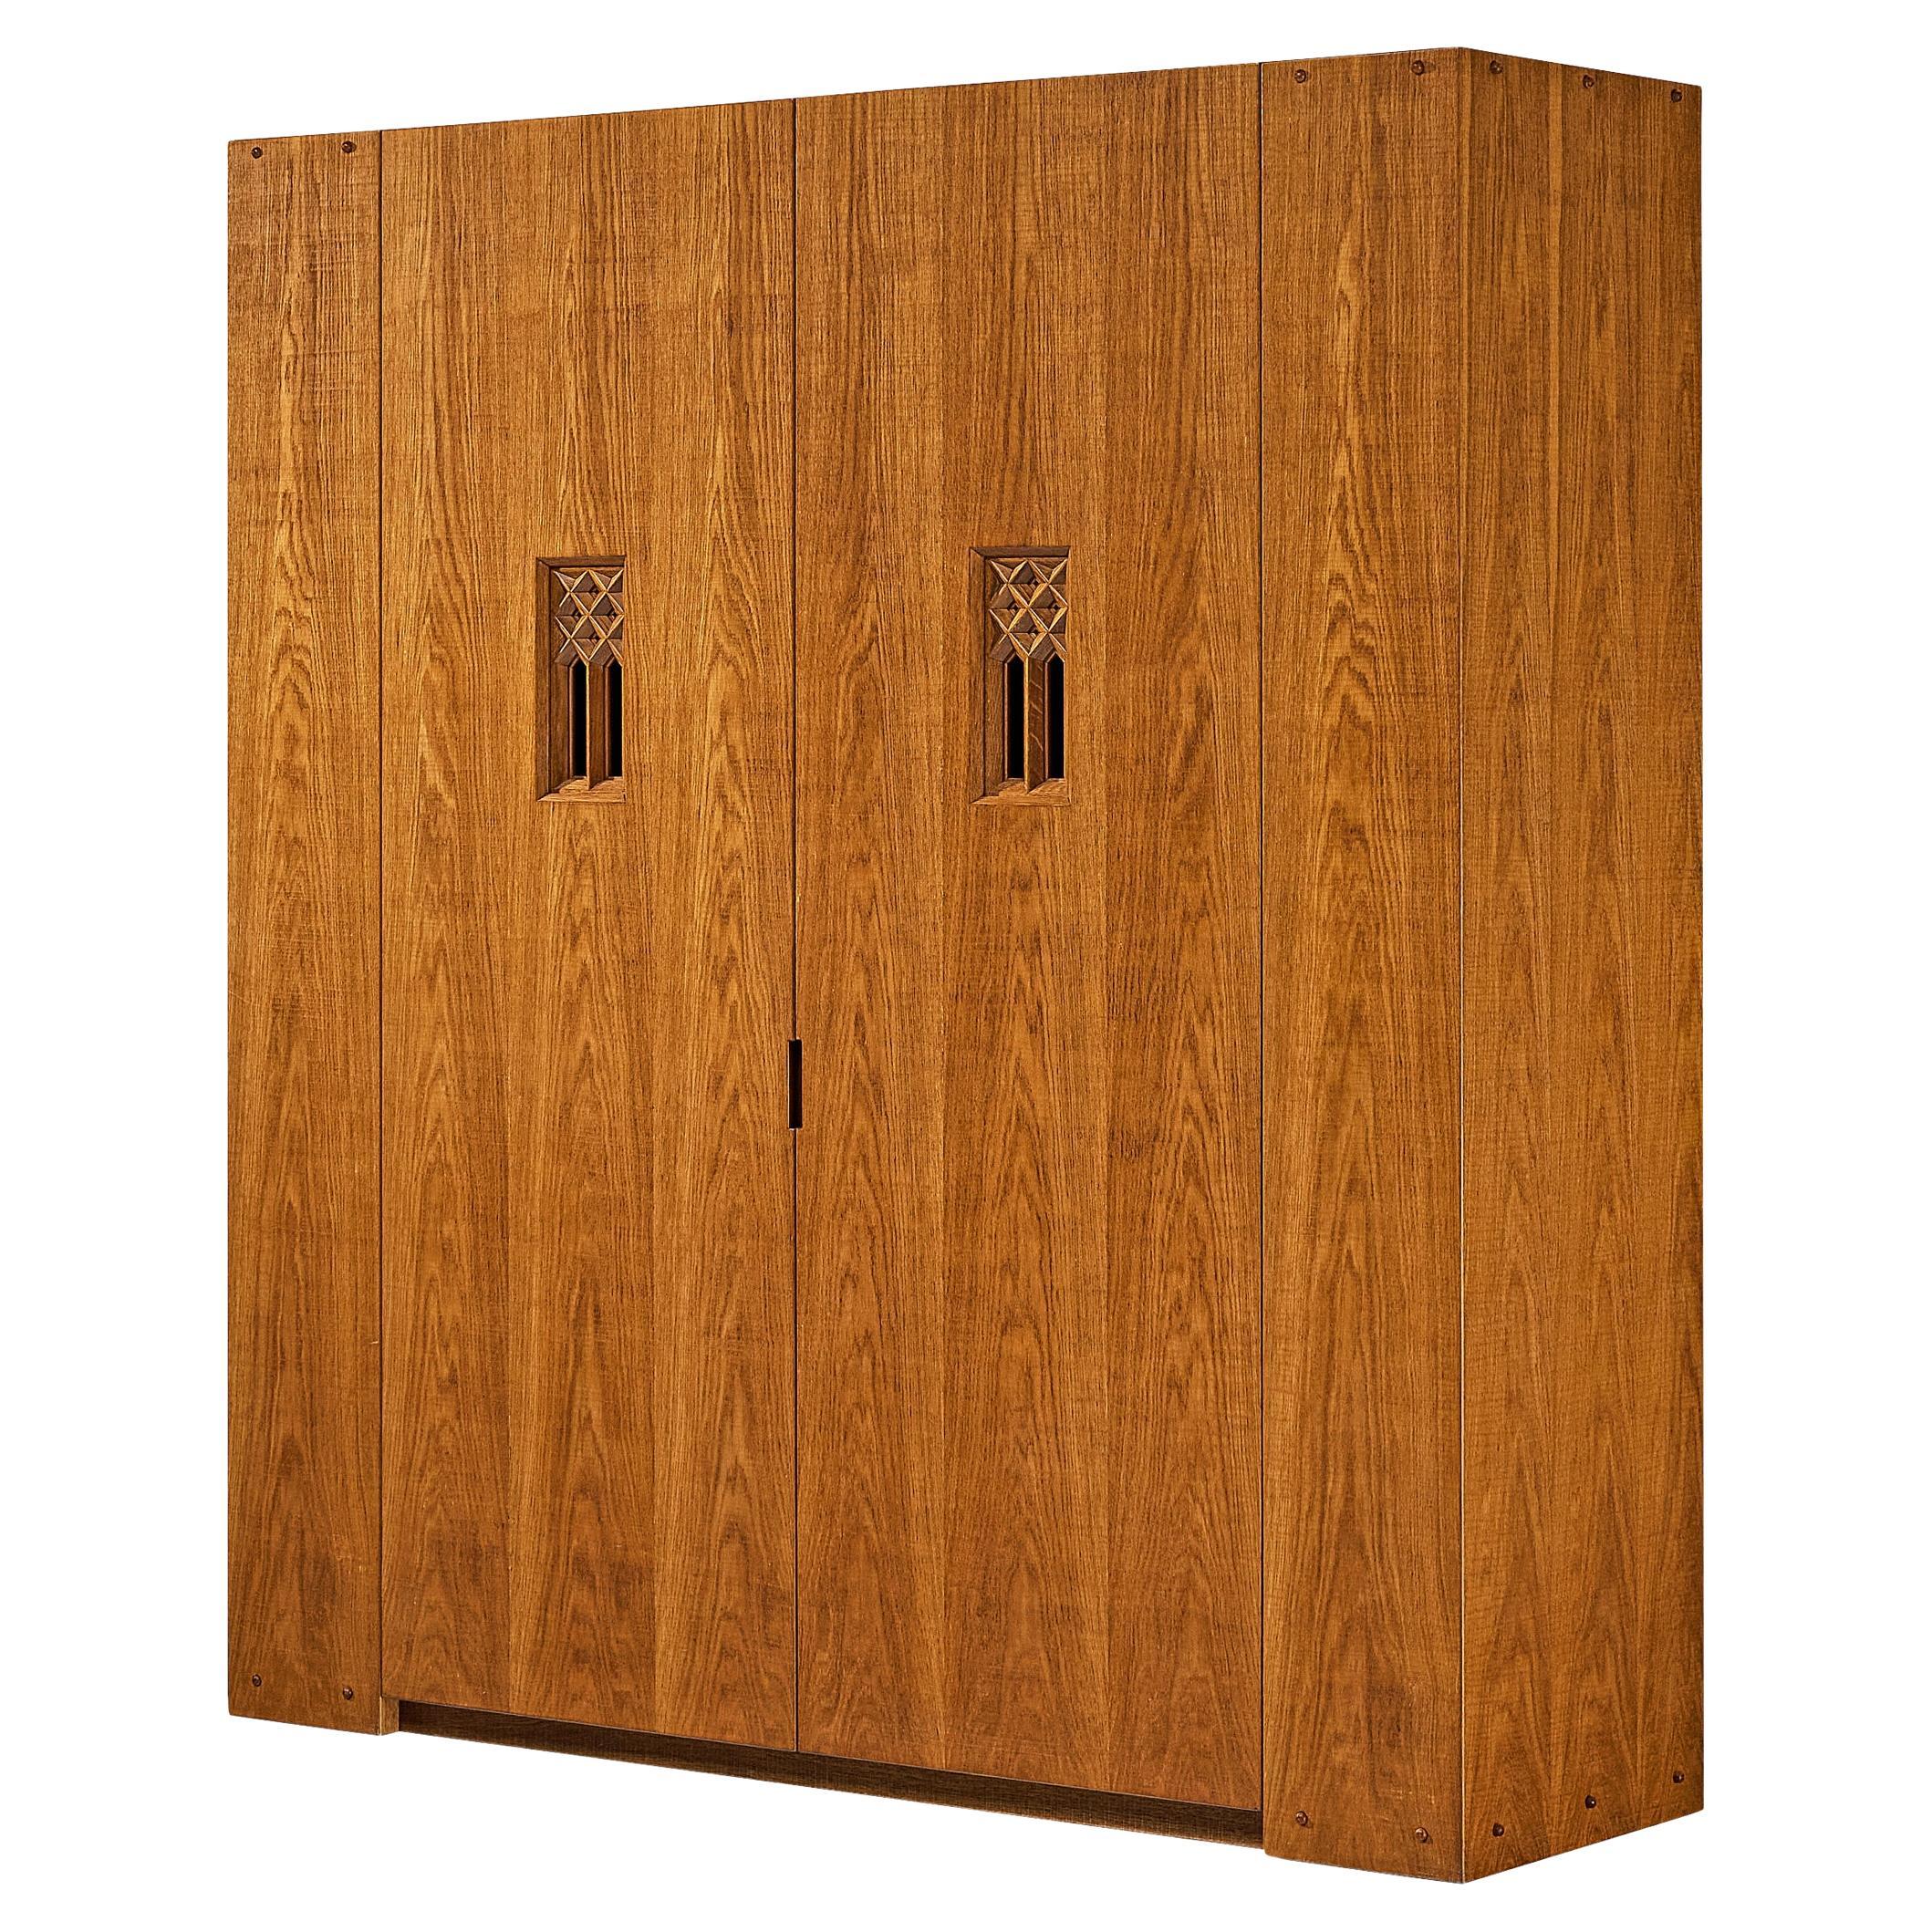 Giuseppe Rivadossi Highboard in Oak with Recessed Geometric Carvings For Sale